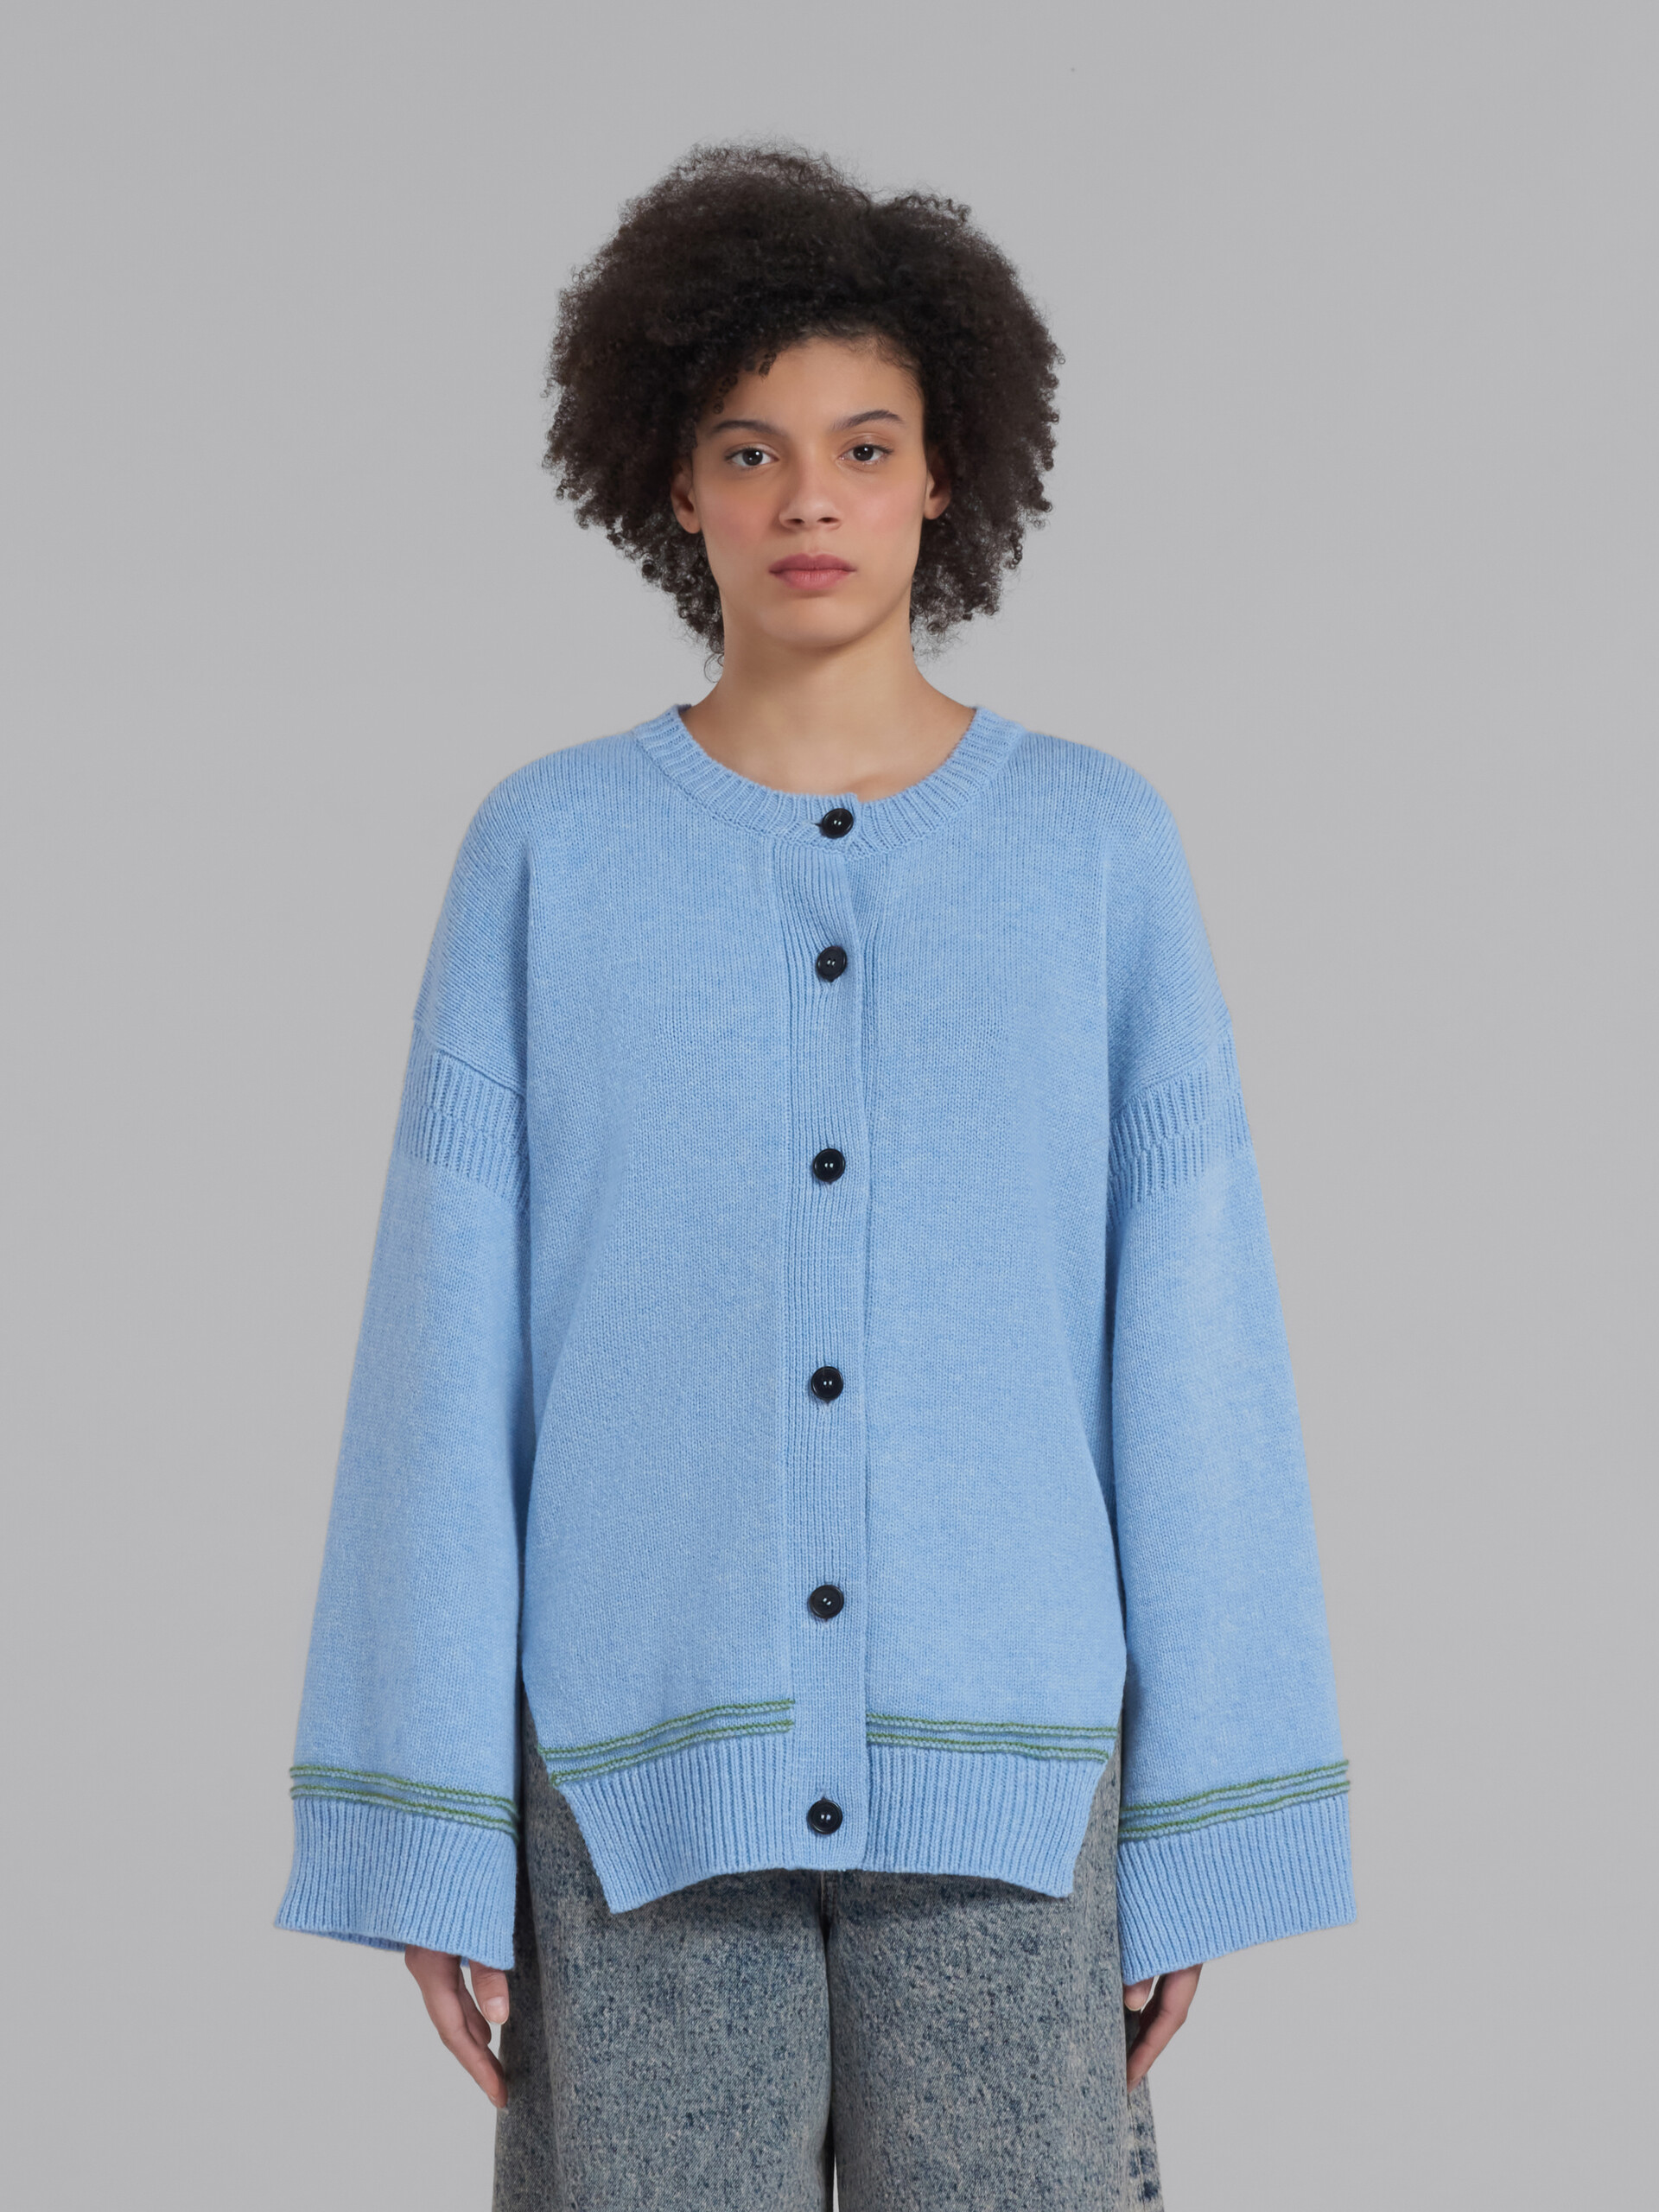 Blue wool cardigan with kimono sleeves - Pullovers - Image 2